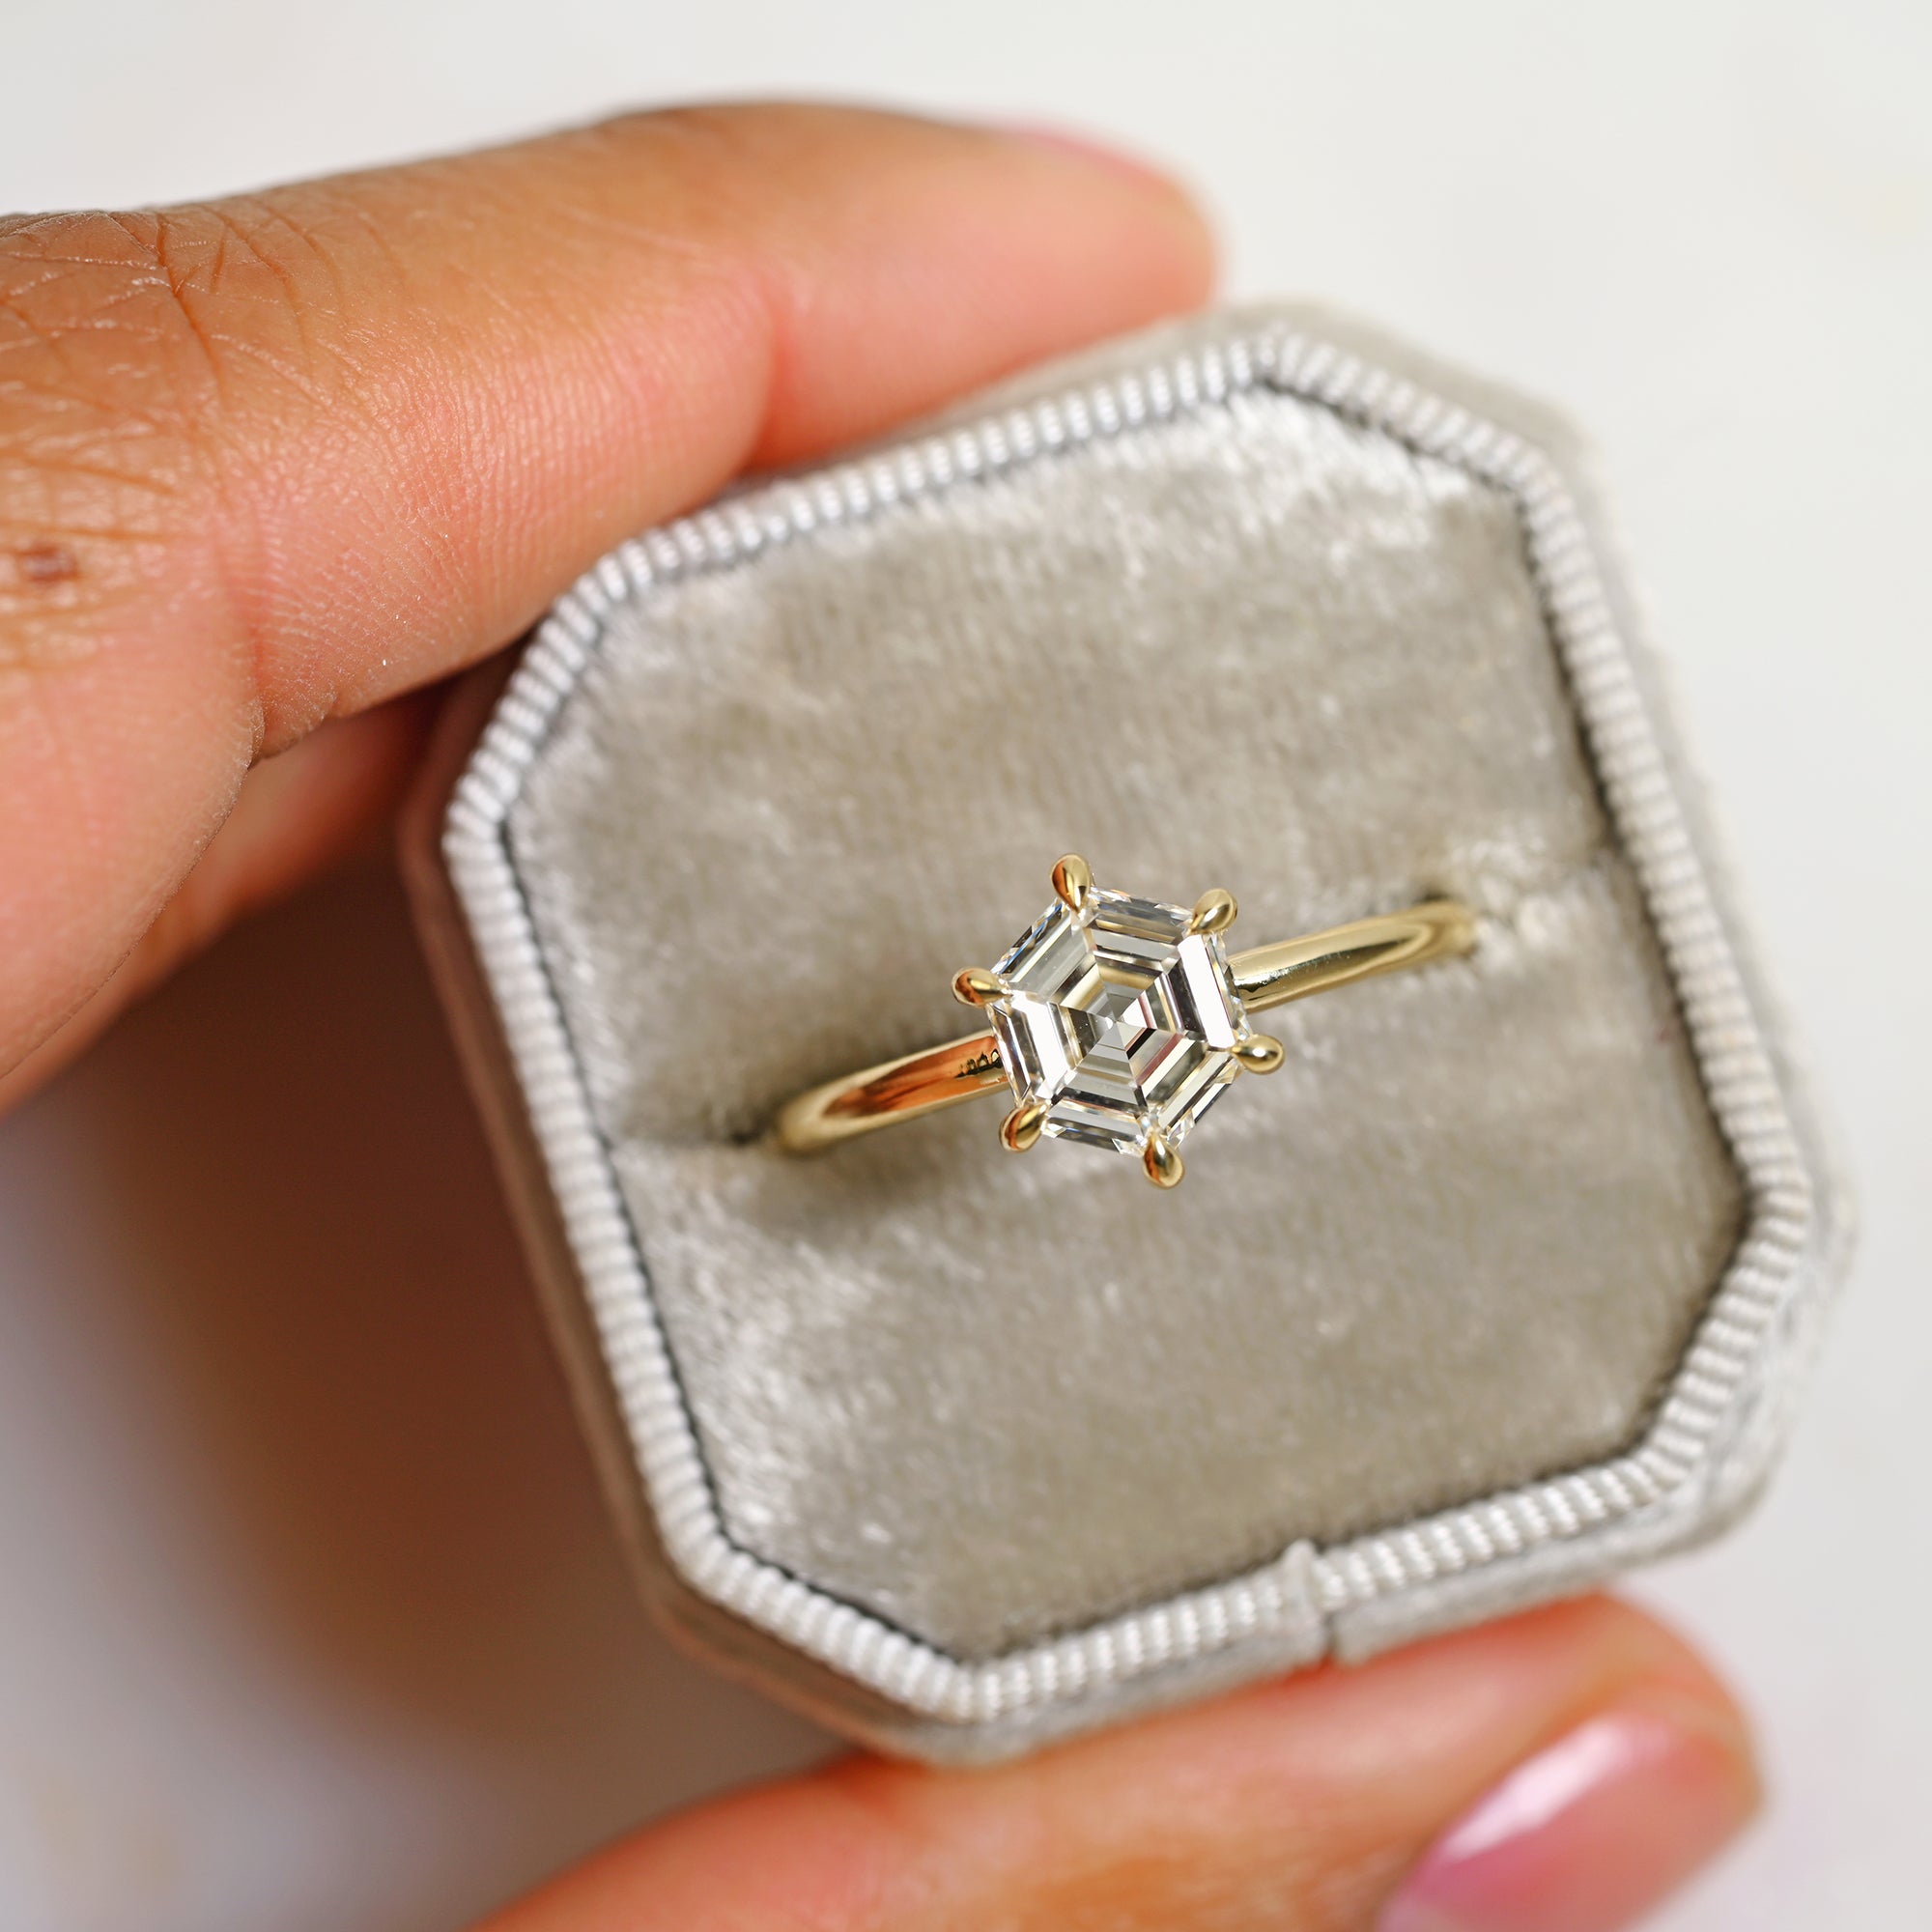 Geometric hexagon diamond engagement ring in 14k yellow gold solitaire setting with six prongs in a gray ring box